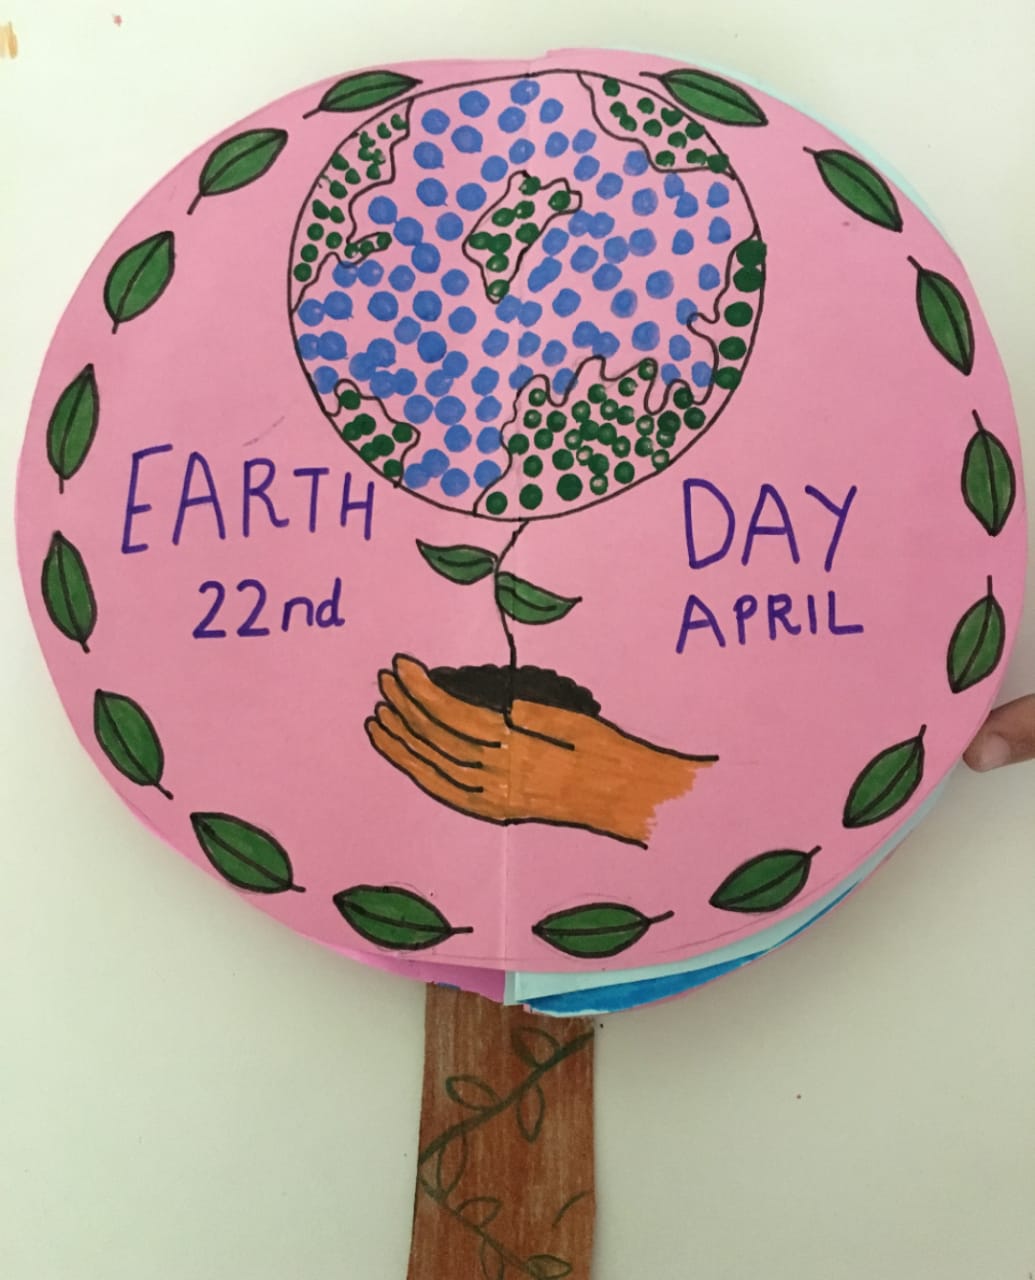 Primary Wing Celebrates Earth Day